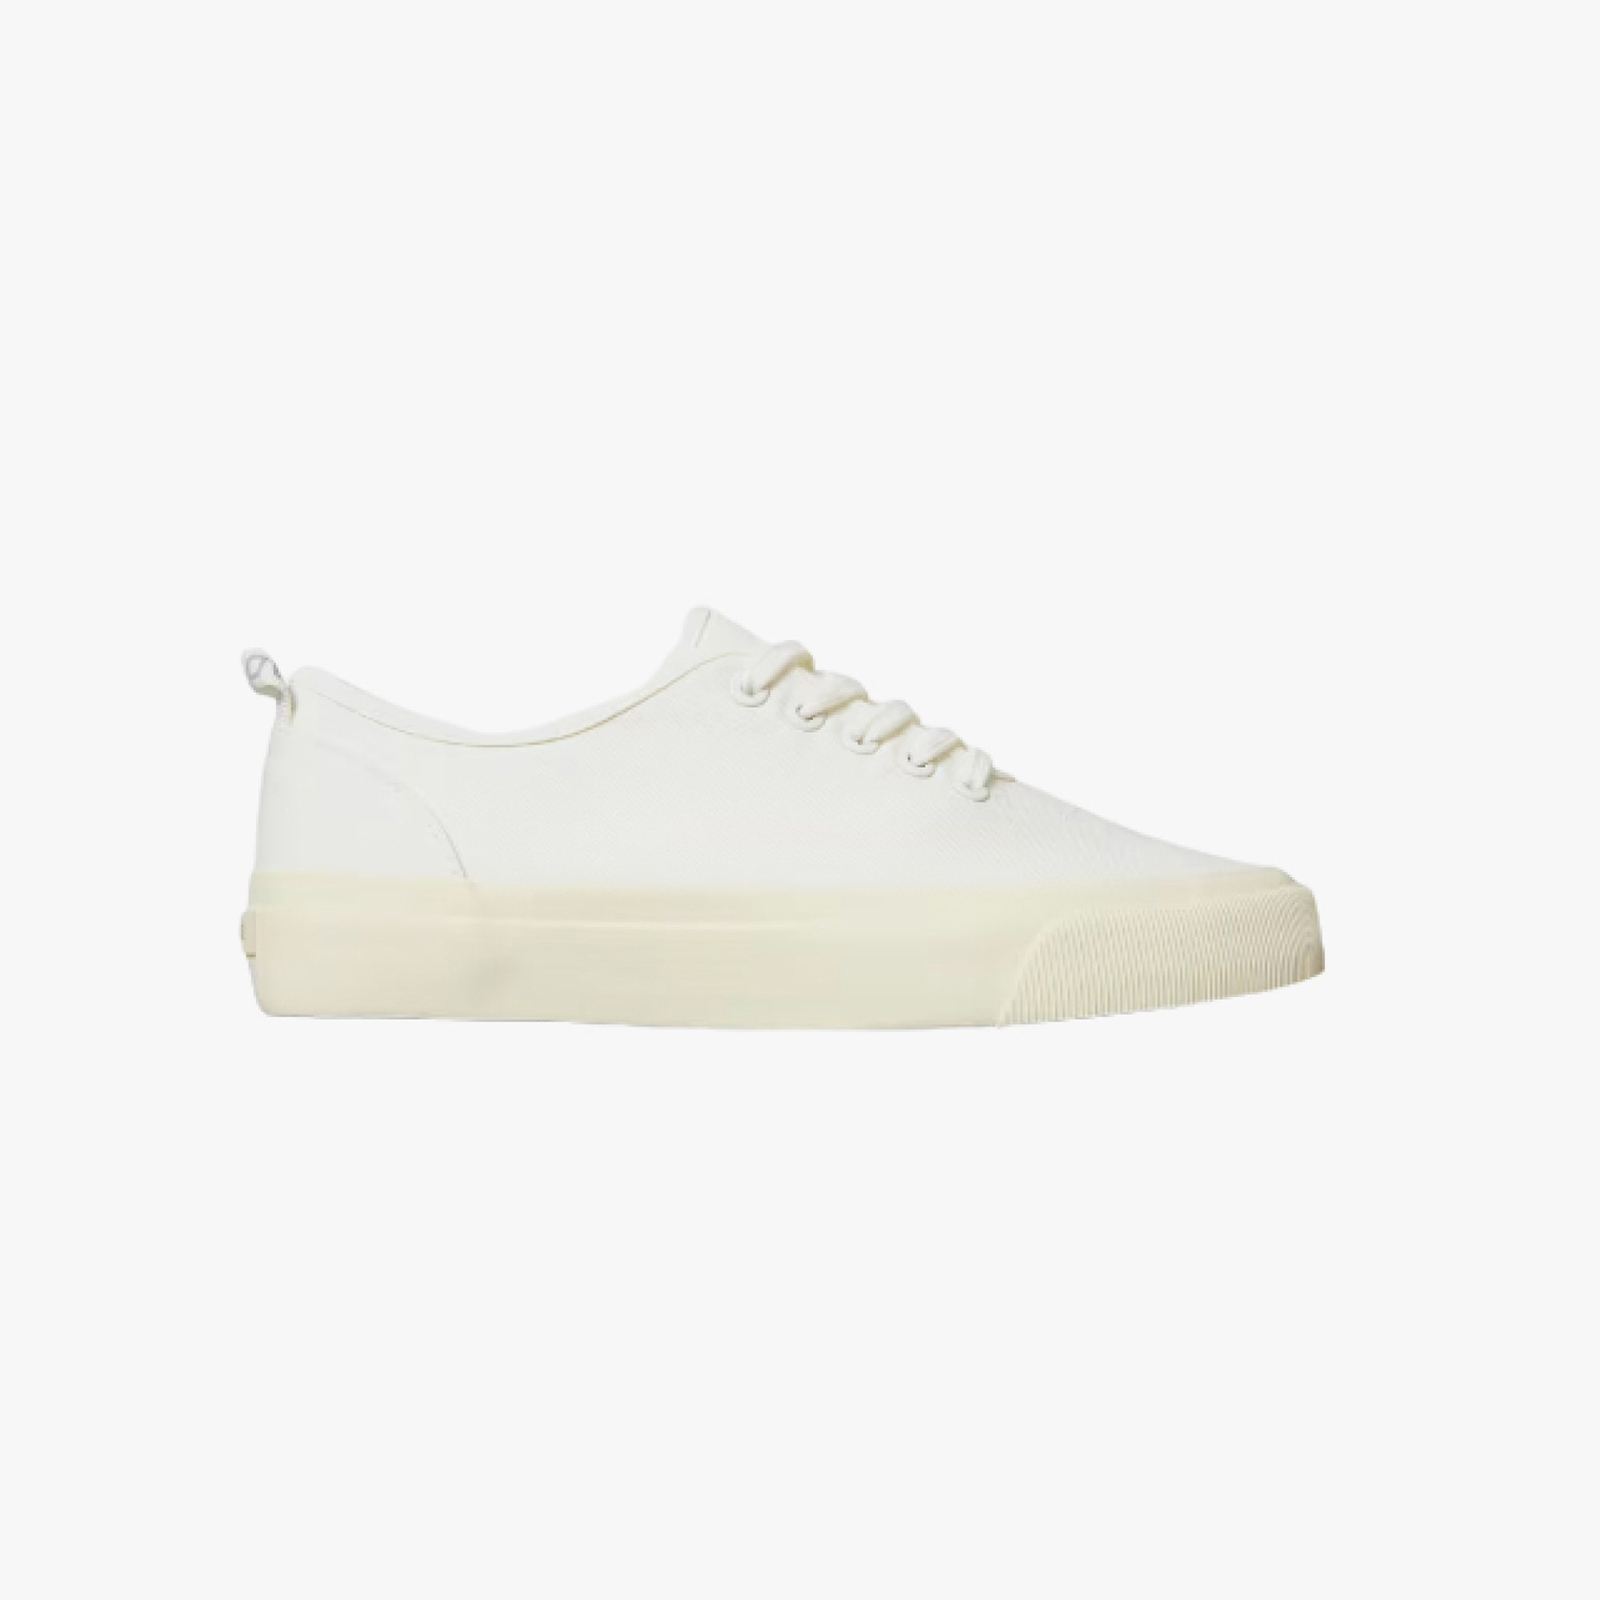 Shop 17 Pared-Back Sneakers That Will Never Go Out of Style | Gallery